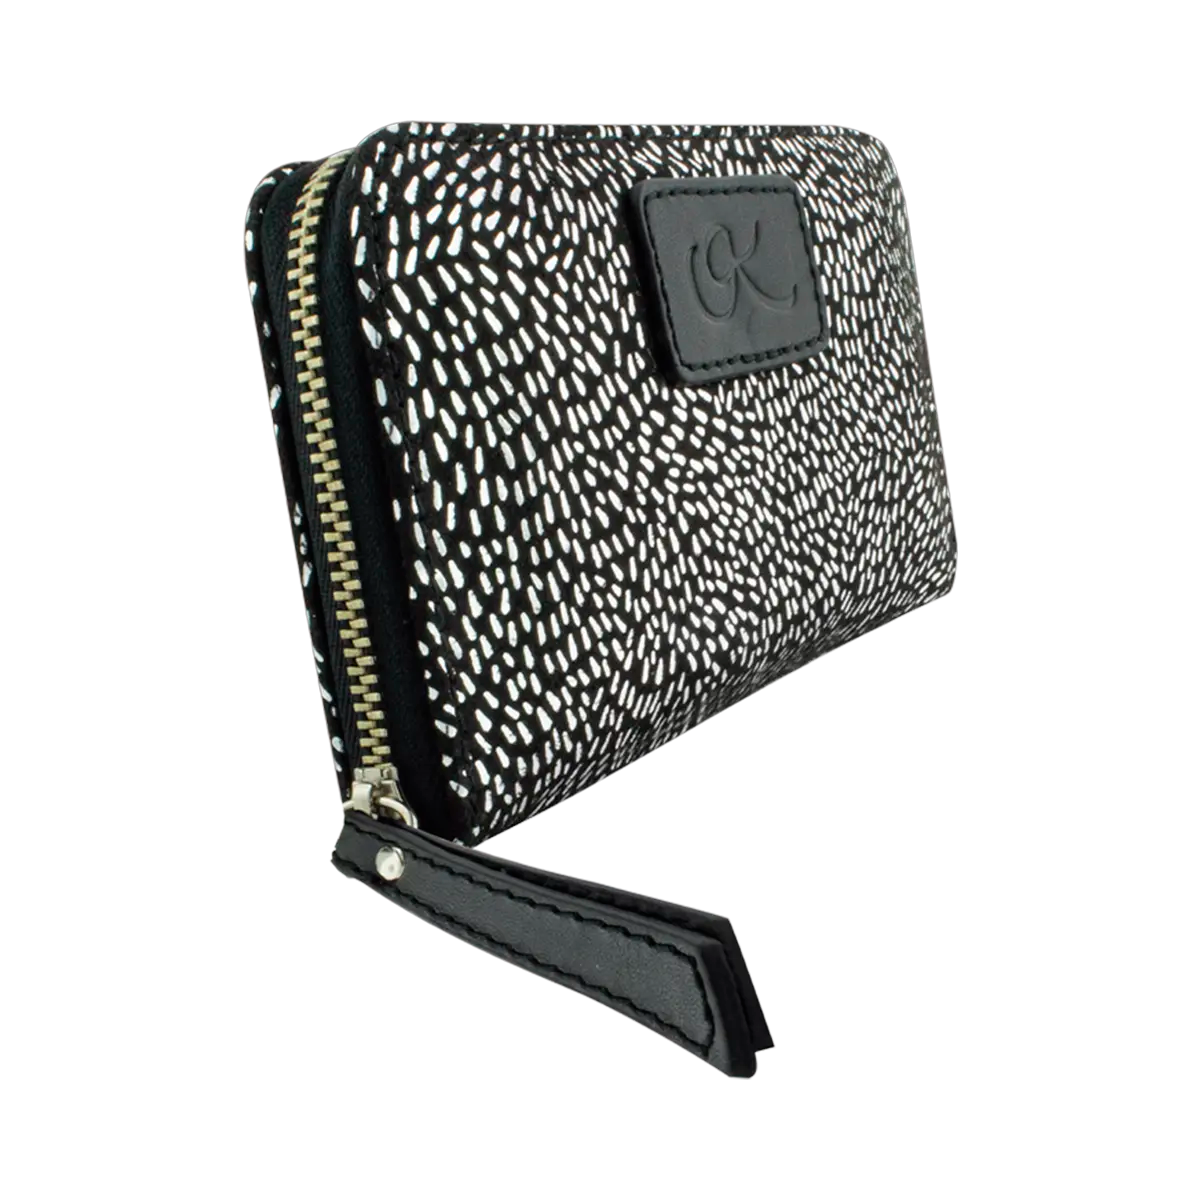 small black silver stripe print leather wallet. Fashion Accessories for women in San Diego, CA.